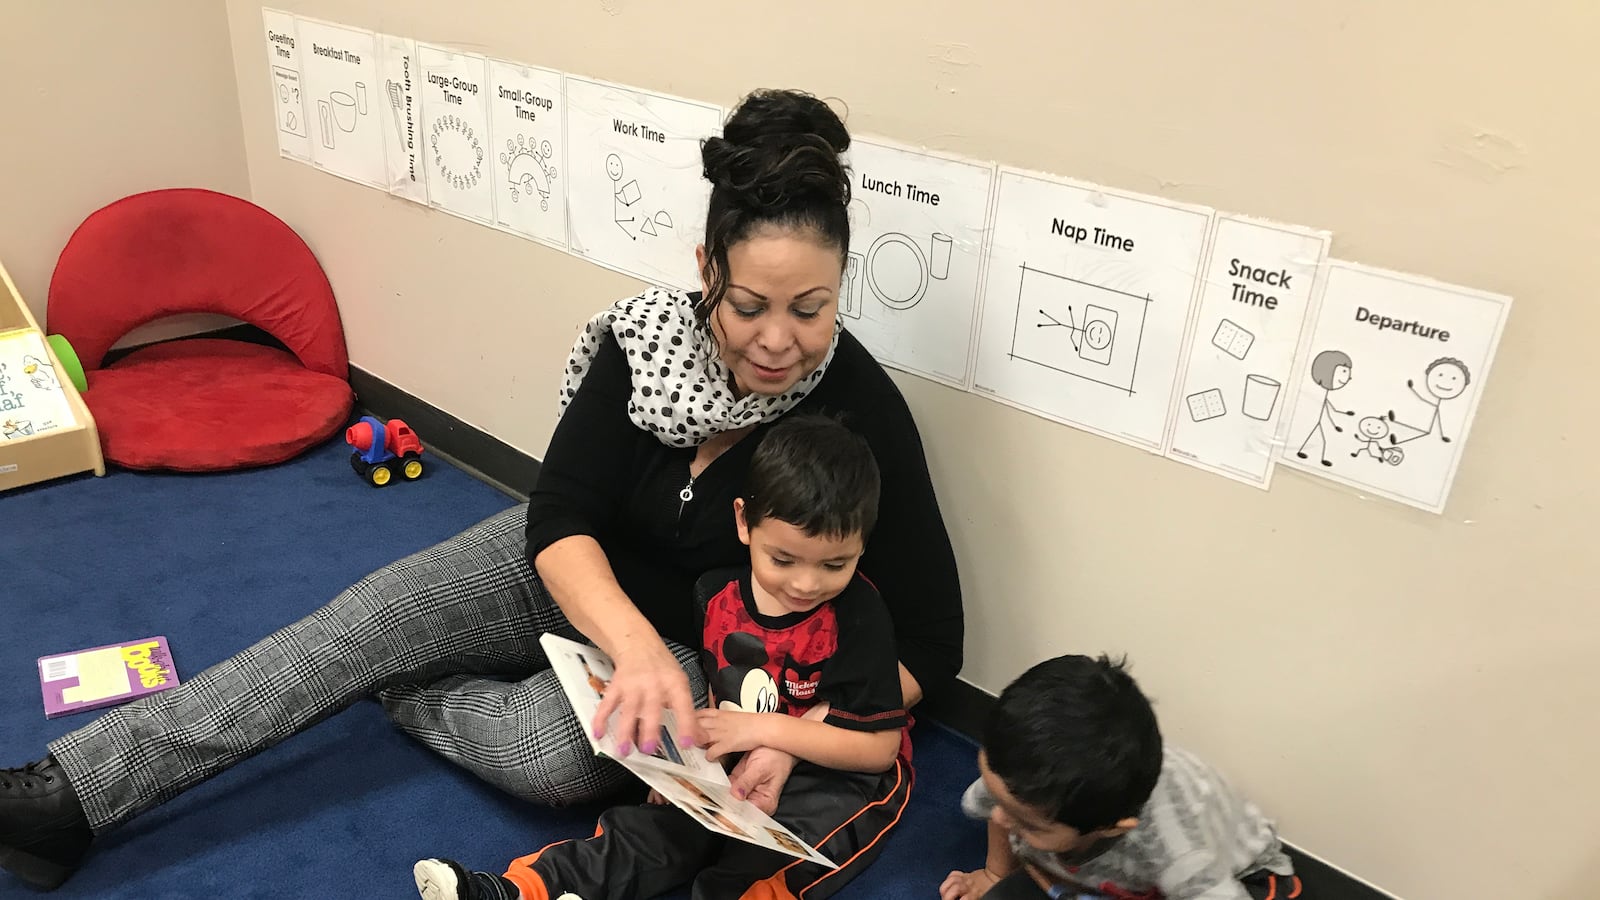 Evangelina De La Fuente, worries that the Head Start her 3-year-old twin grandsons attend could close or change. "The babies are secure and they’re happy and they’re well fed and they’re well taken cared for. It’s scary to think it could change," she said.